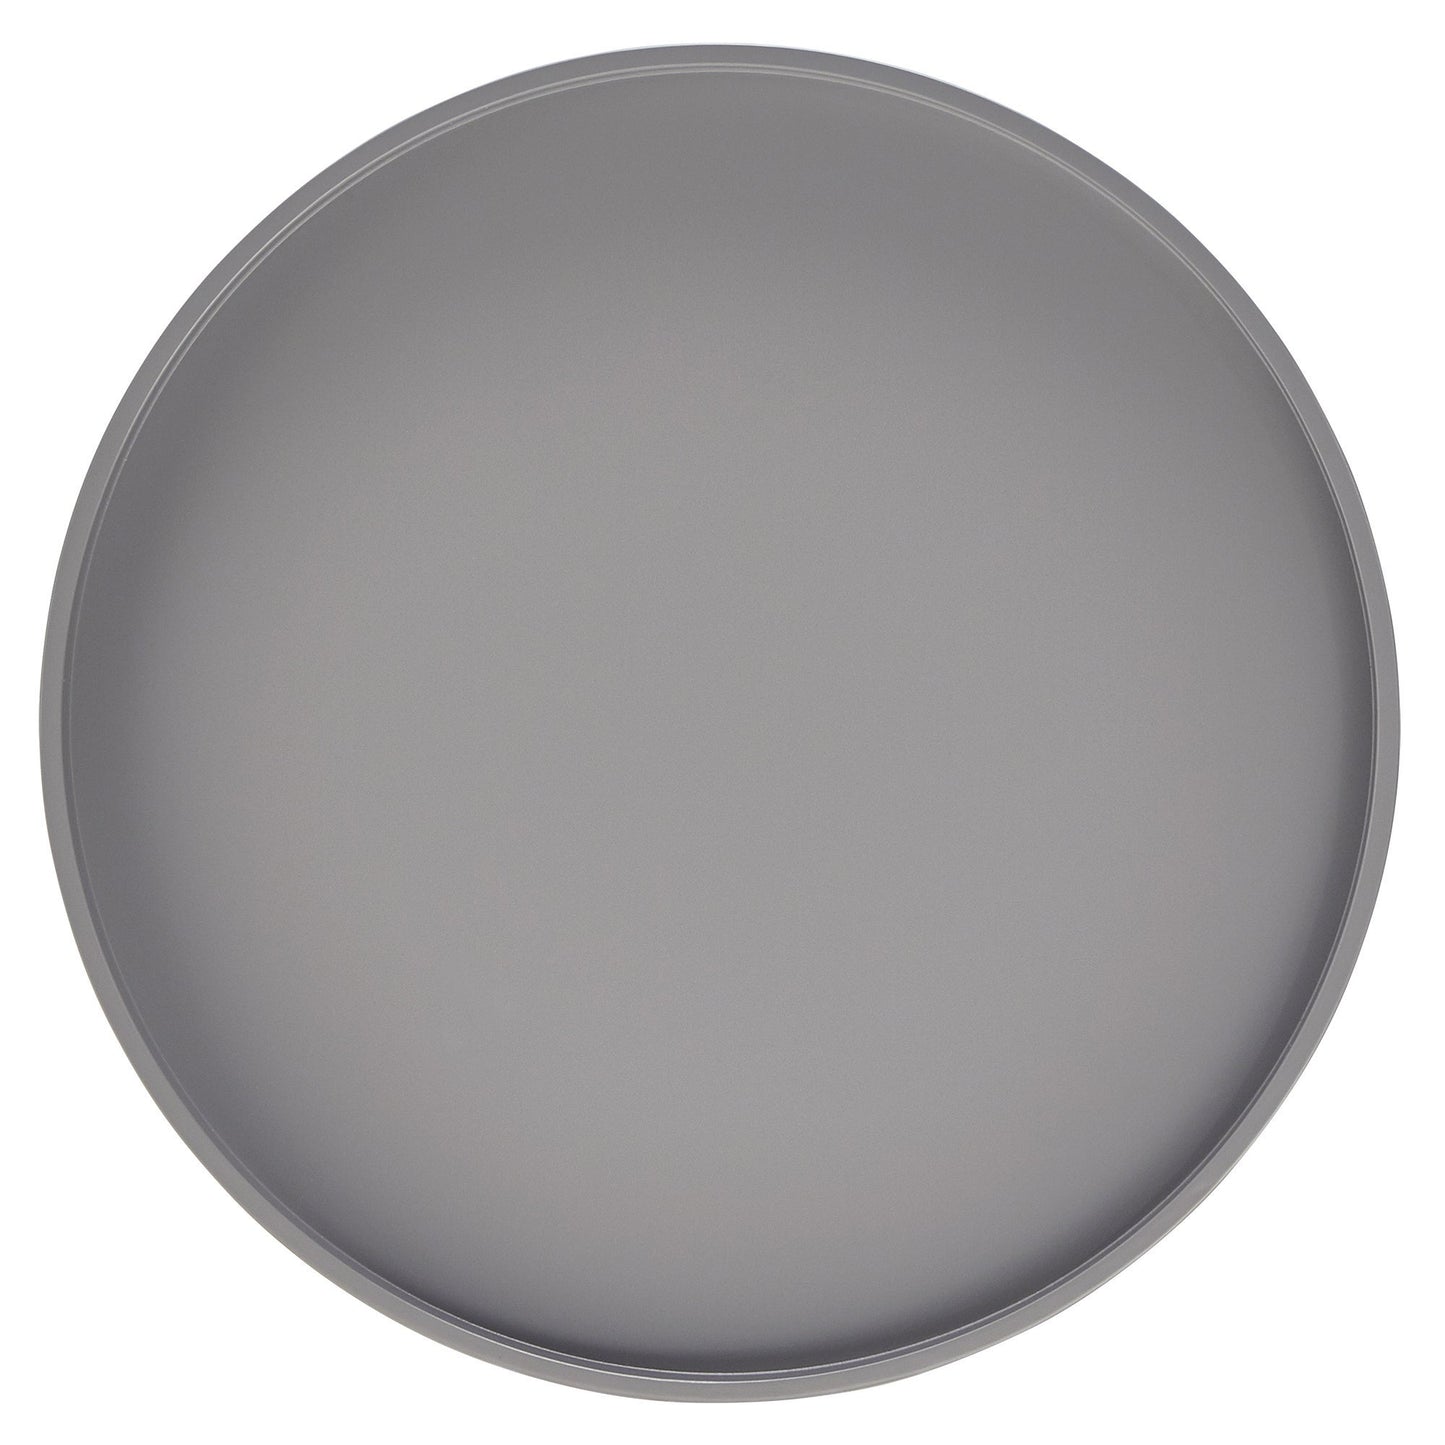 Paint-Dipped Round Tray-Top End Table - Frost Grey